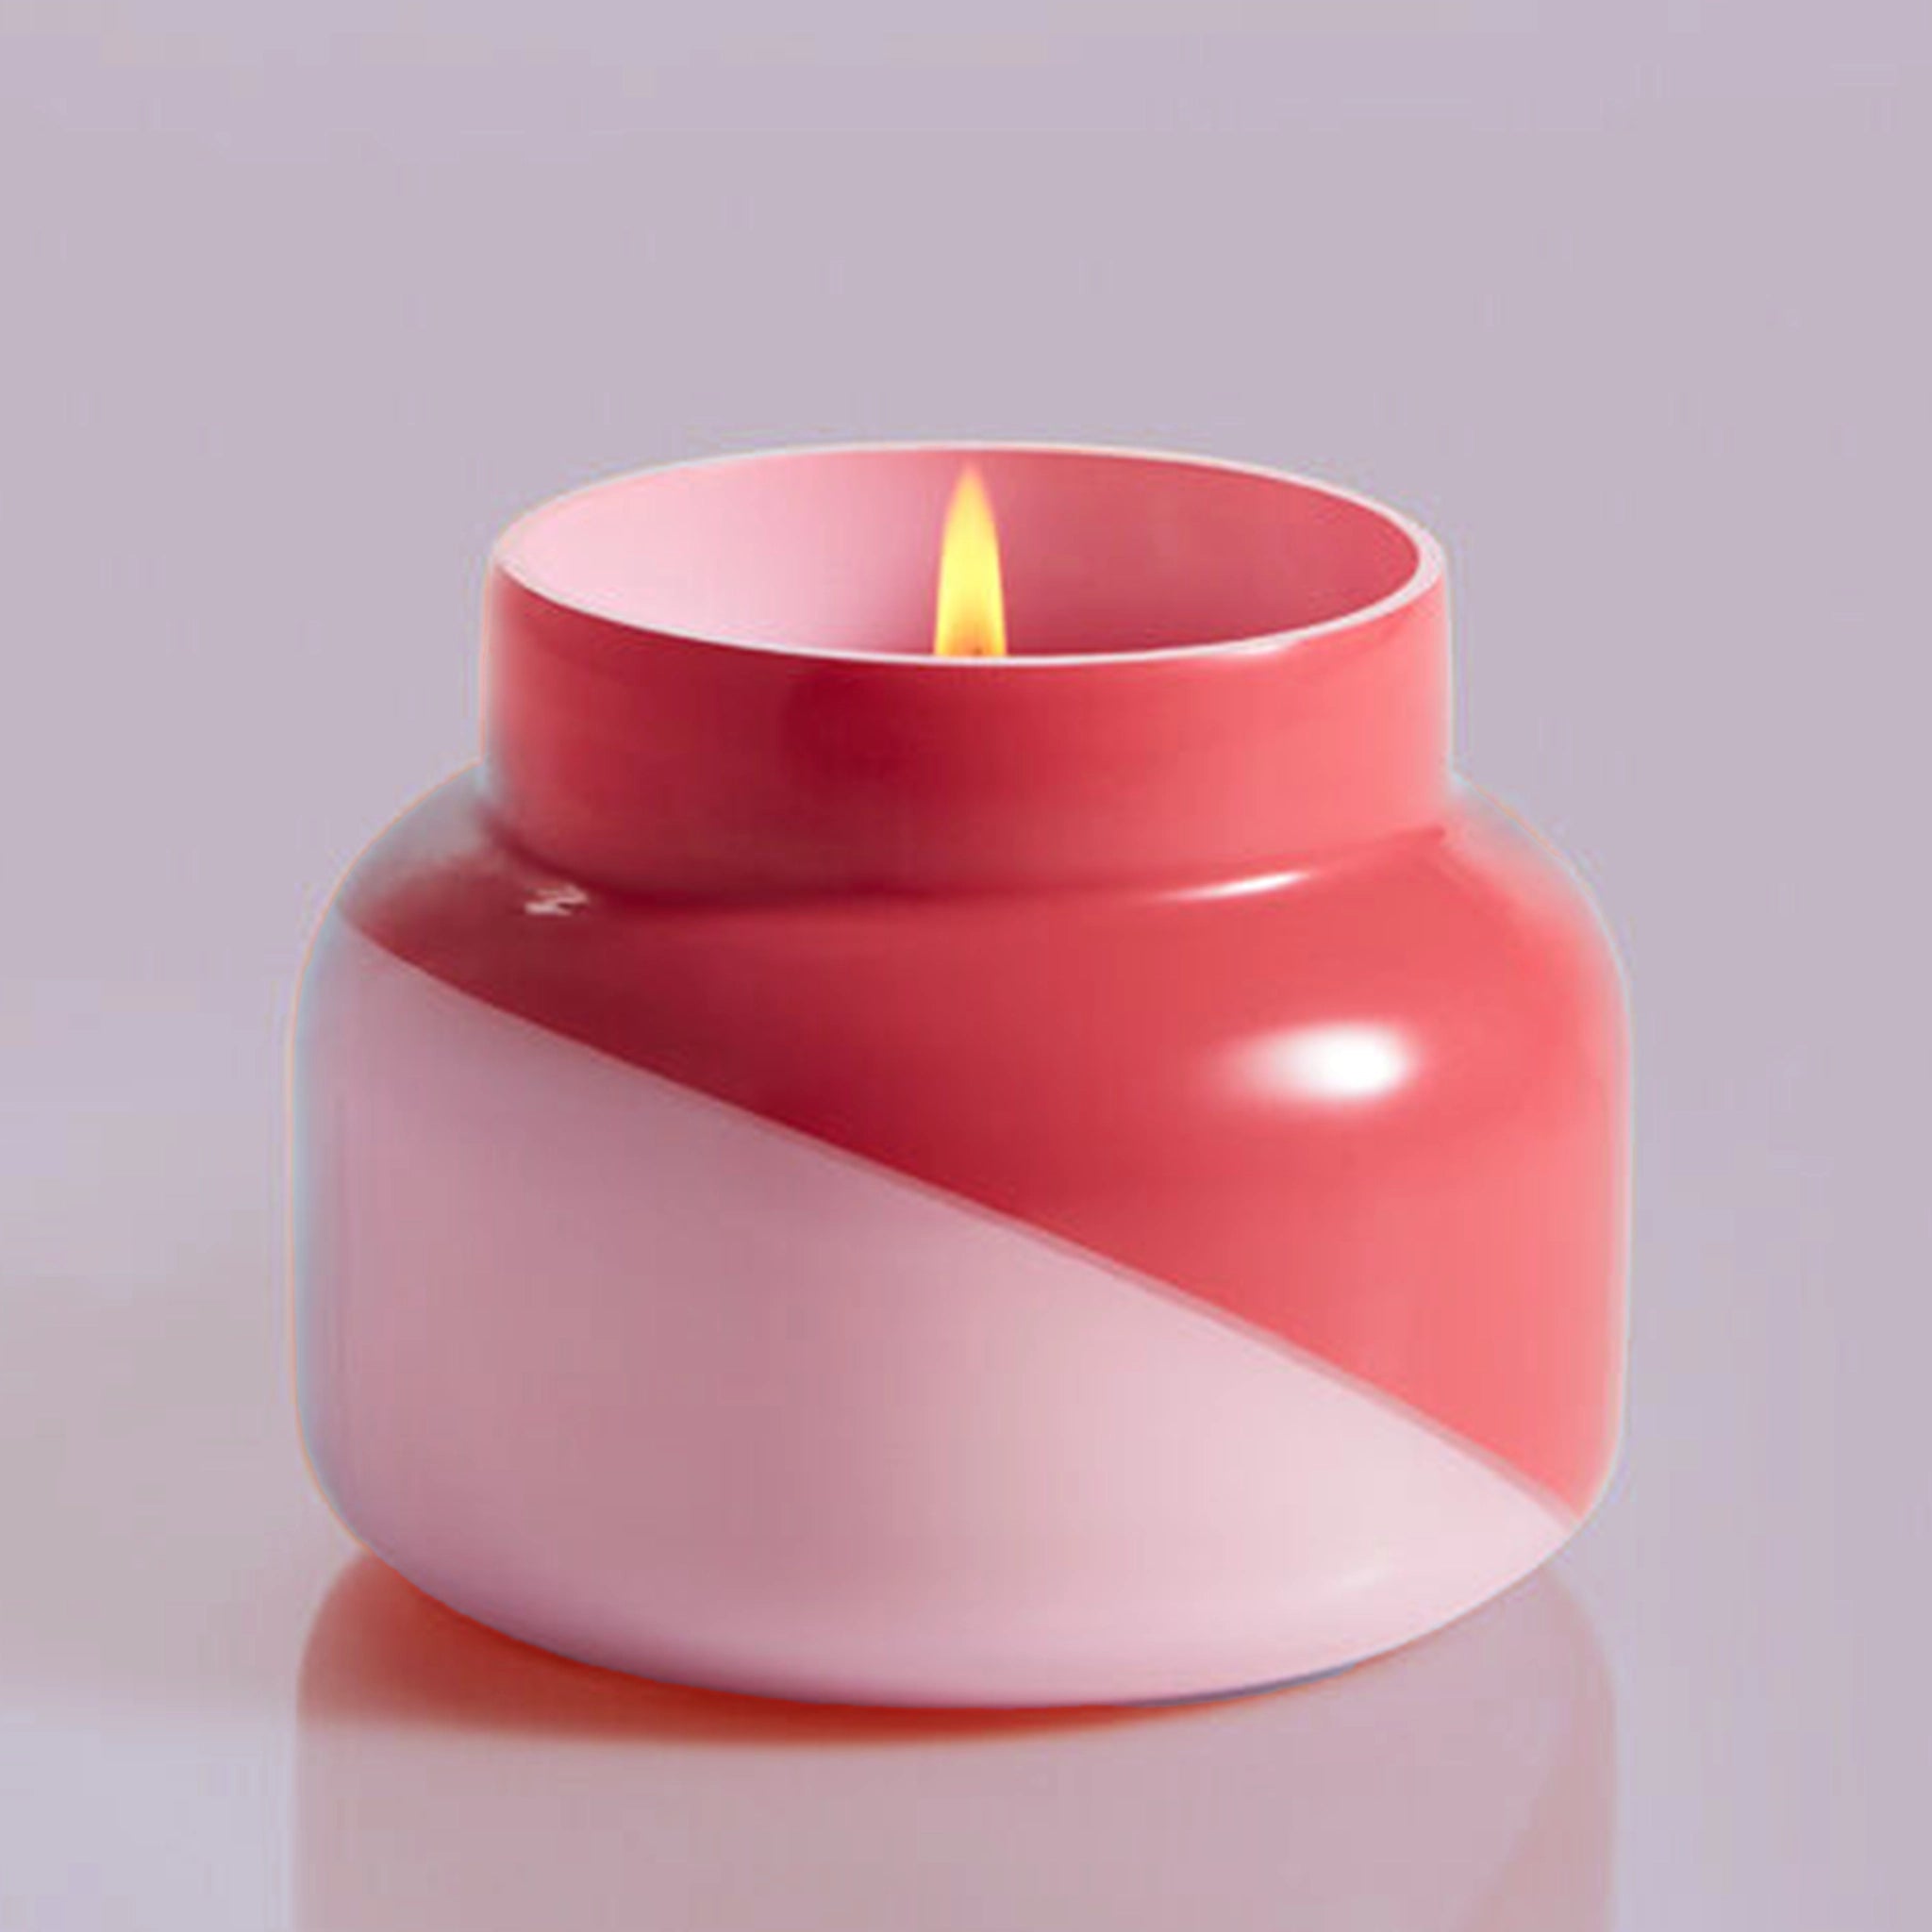 A glass candle jar with a two toned design featuring a light pink and a darker pink that is split diagonally.